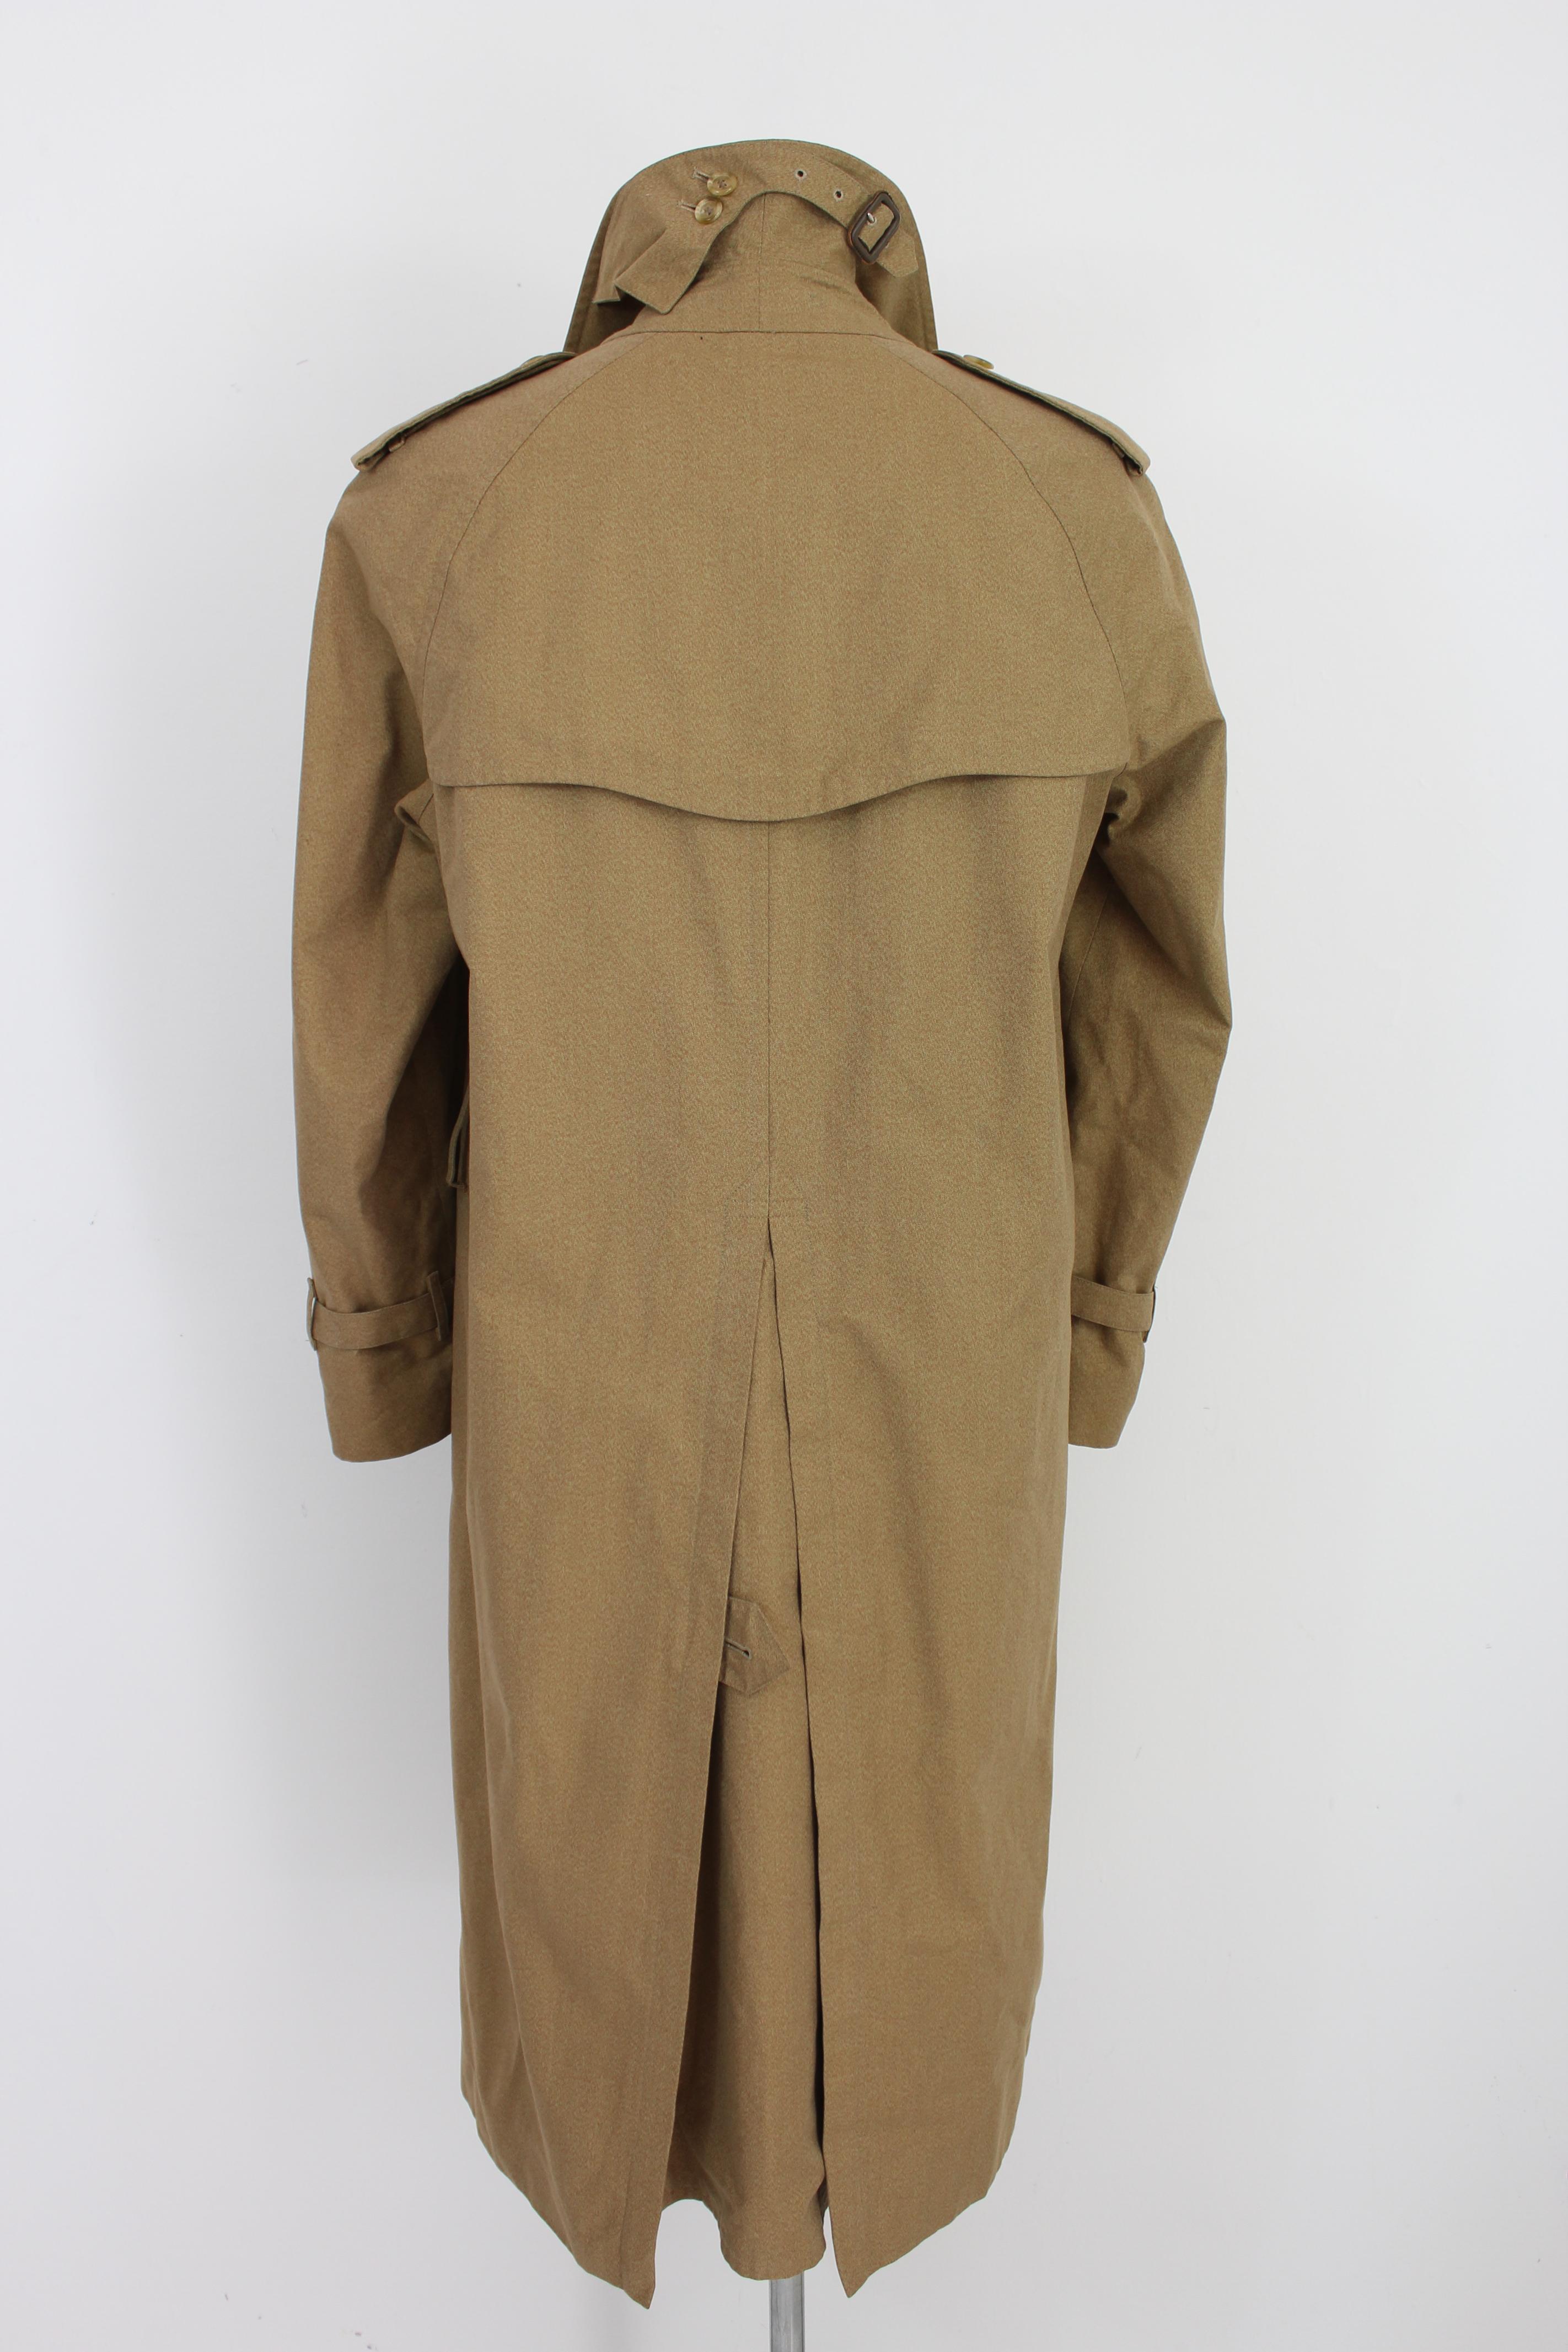 Burberry vintage 80s men's coat. Long model trench coat, double-breasted closure. Beige color, internal and external fabric 100% cotton. Made in Italy. The belt is missing from the coat.

Condition: Excellent

This item has been used a few times but